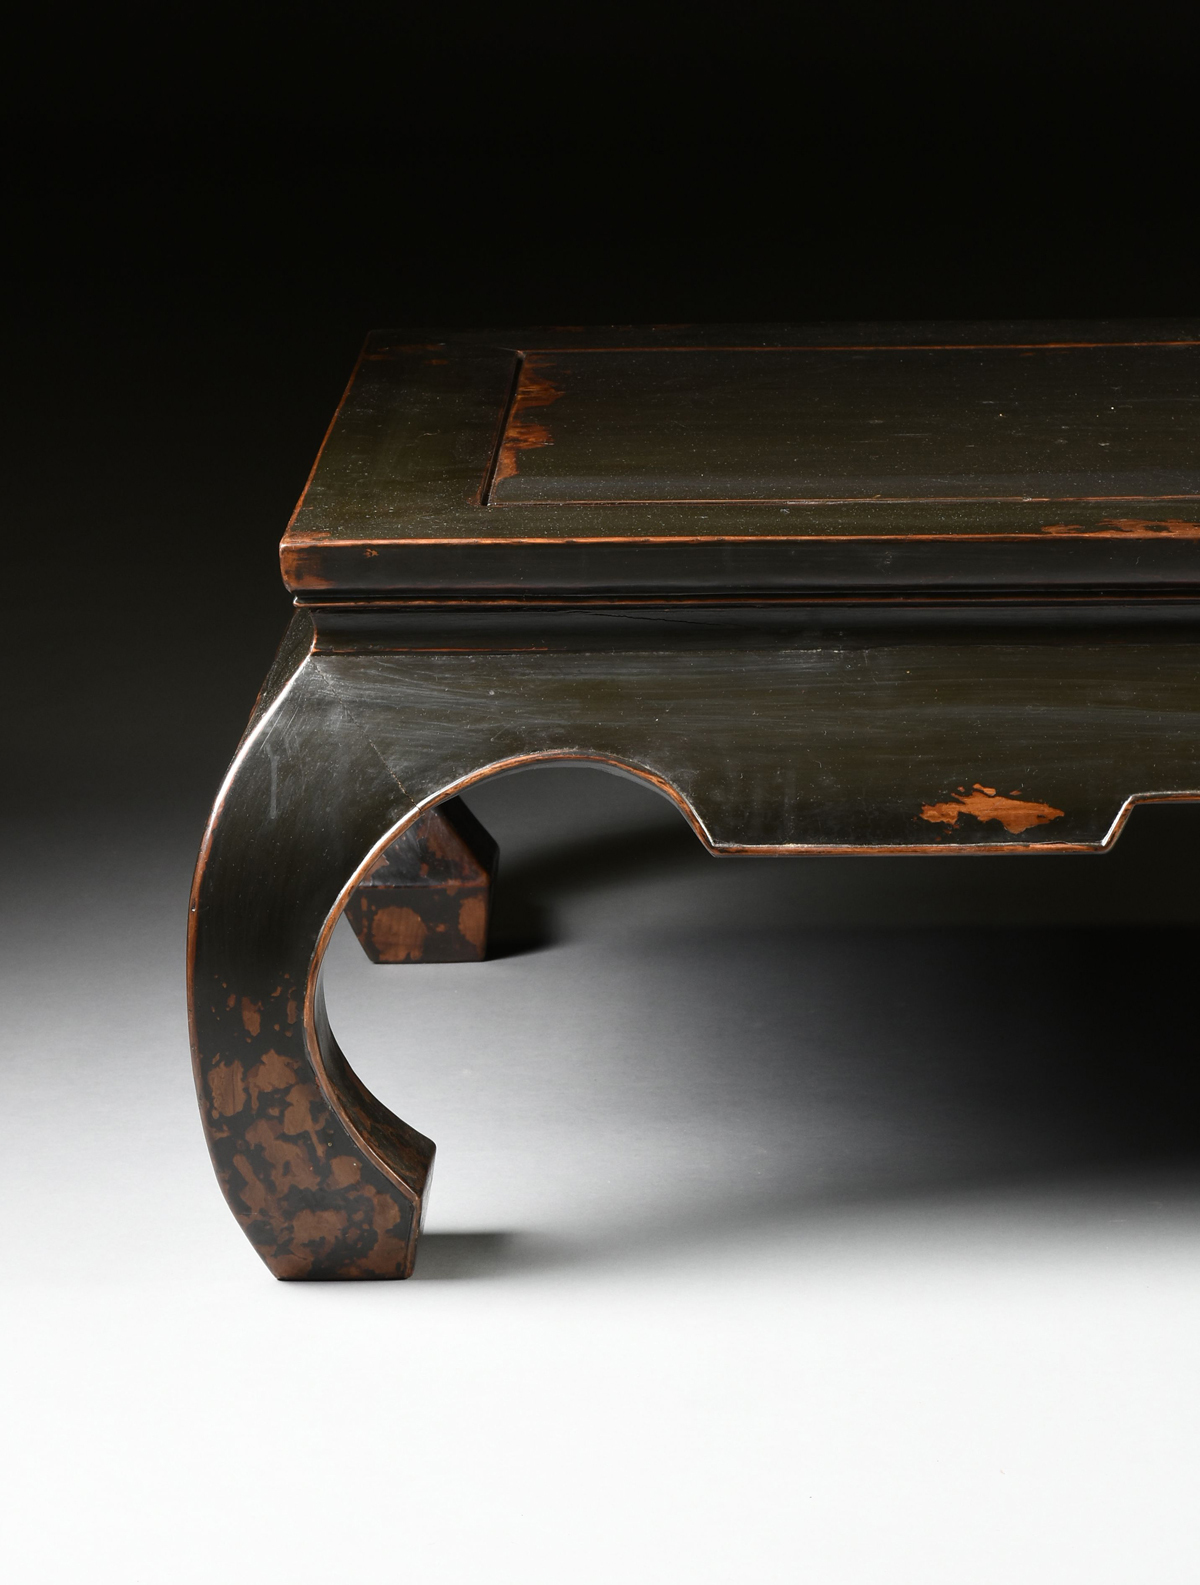 A CHINESE CHARCOAL BLACK LACQUERED WOOD COFFEE TABLE, MODERN, with a rectangular floating panel - Image 3 of 7